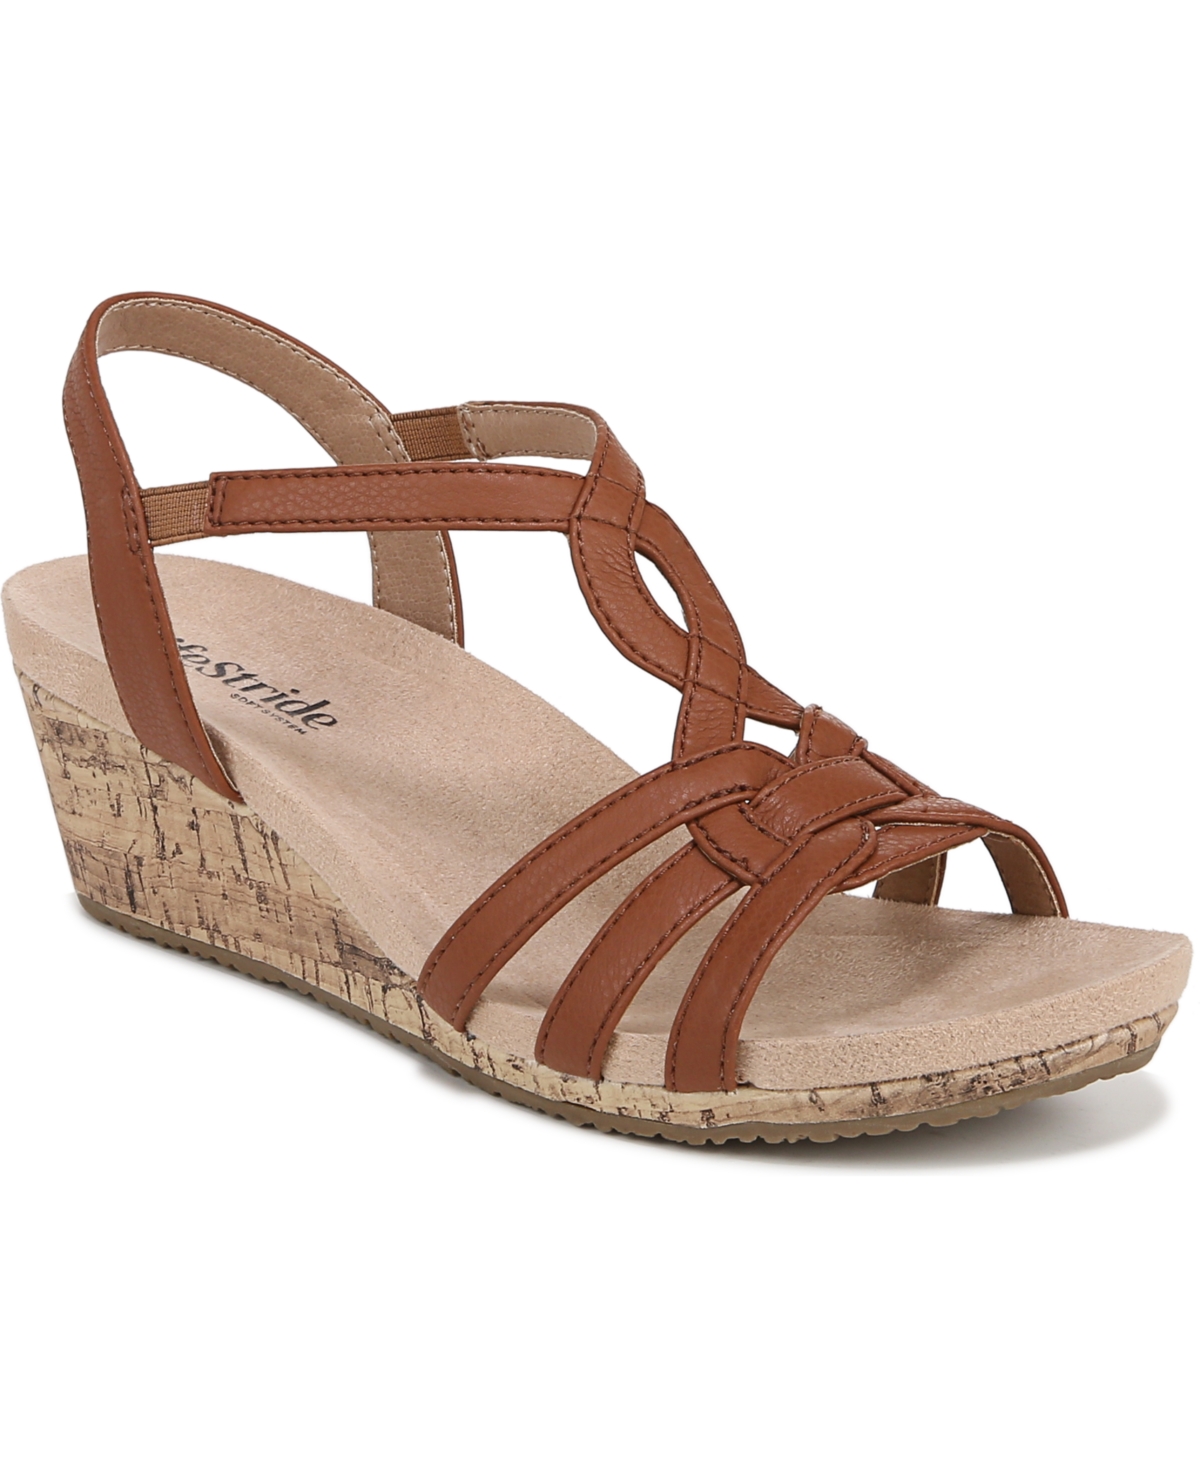 Monaco 2 Strappy Wedge Sandals - Tan Faux Leather